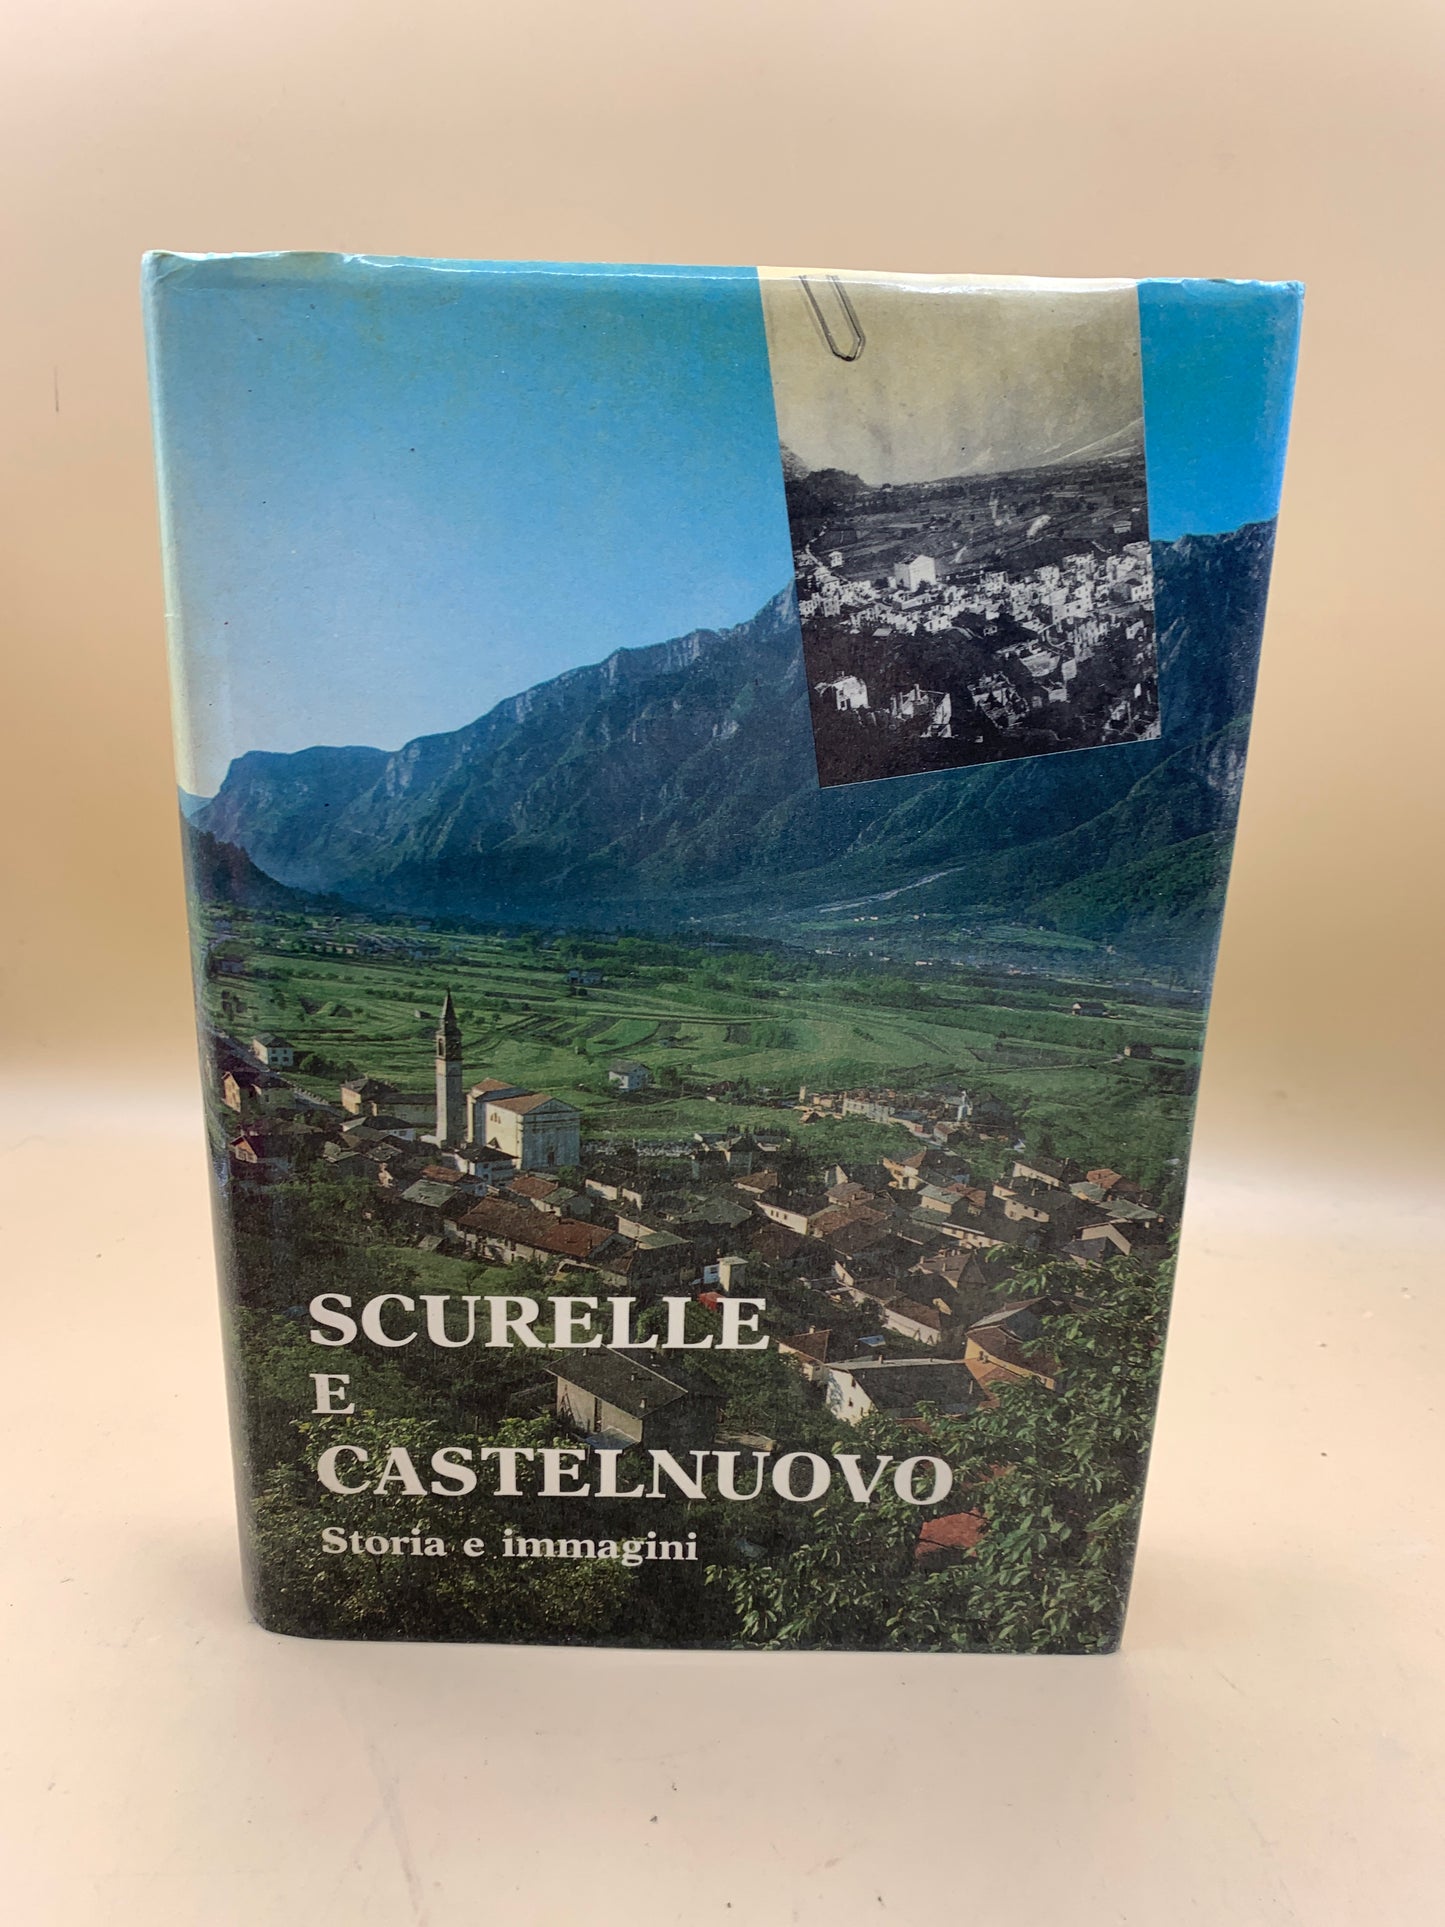 Scurelle and Castelnuovo - History and images